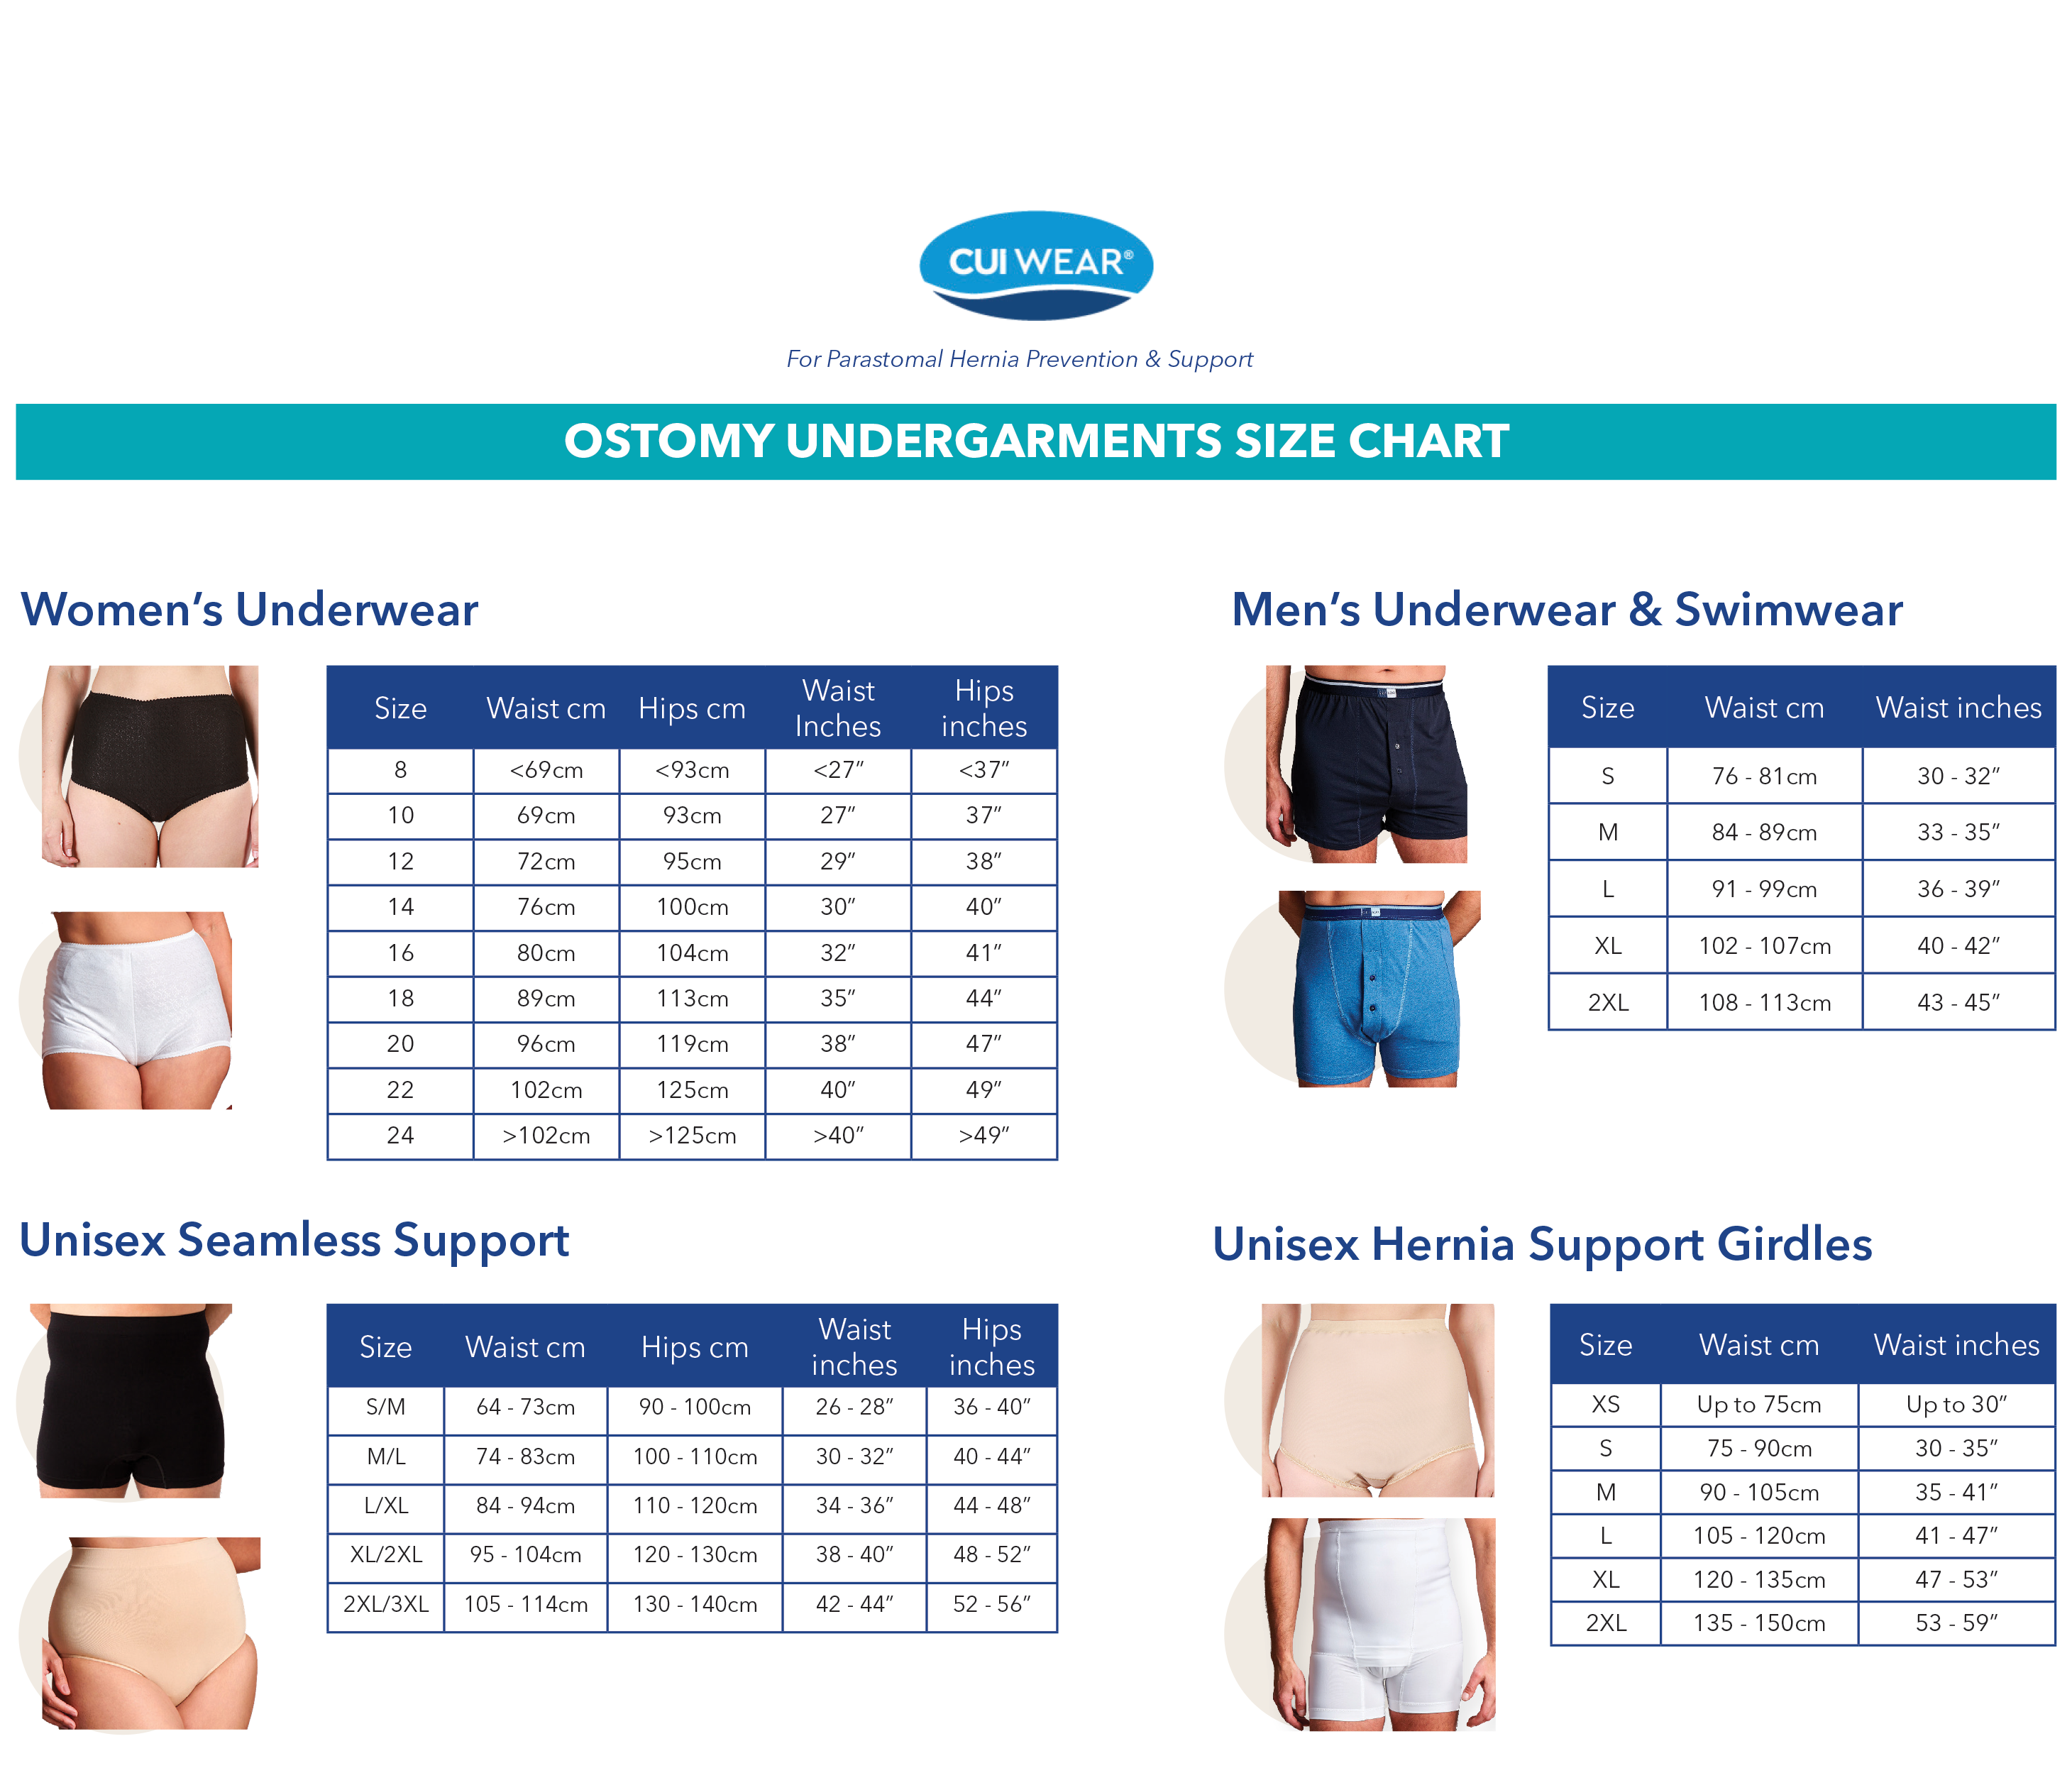 CUI Mens Hernia Low Waist Support Girdle With Legs - 1 each, SMALL, WHITE - 0